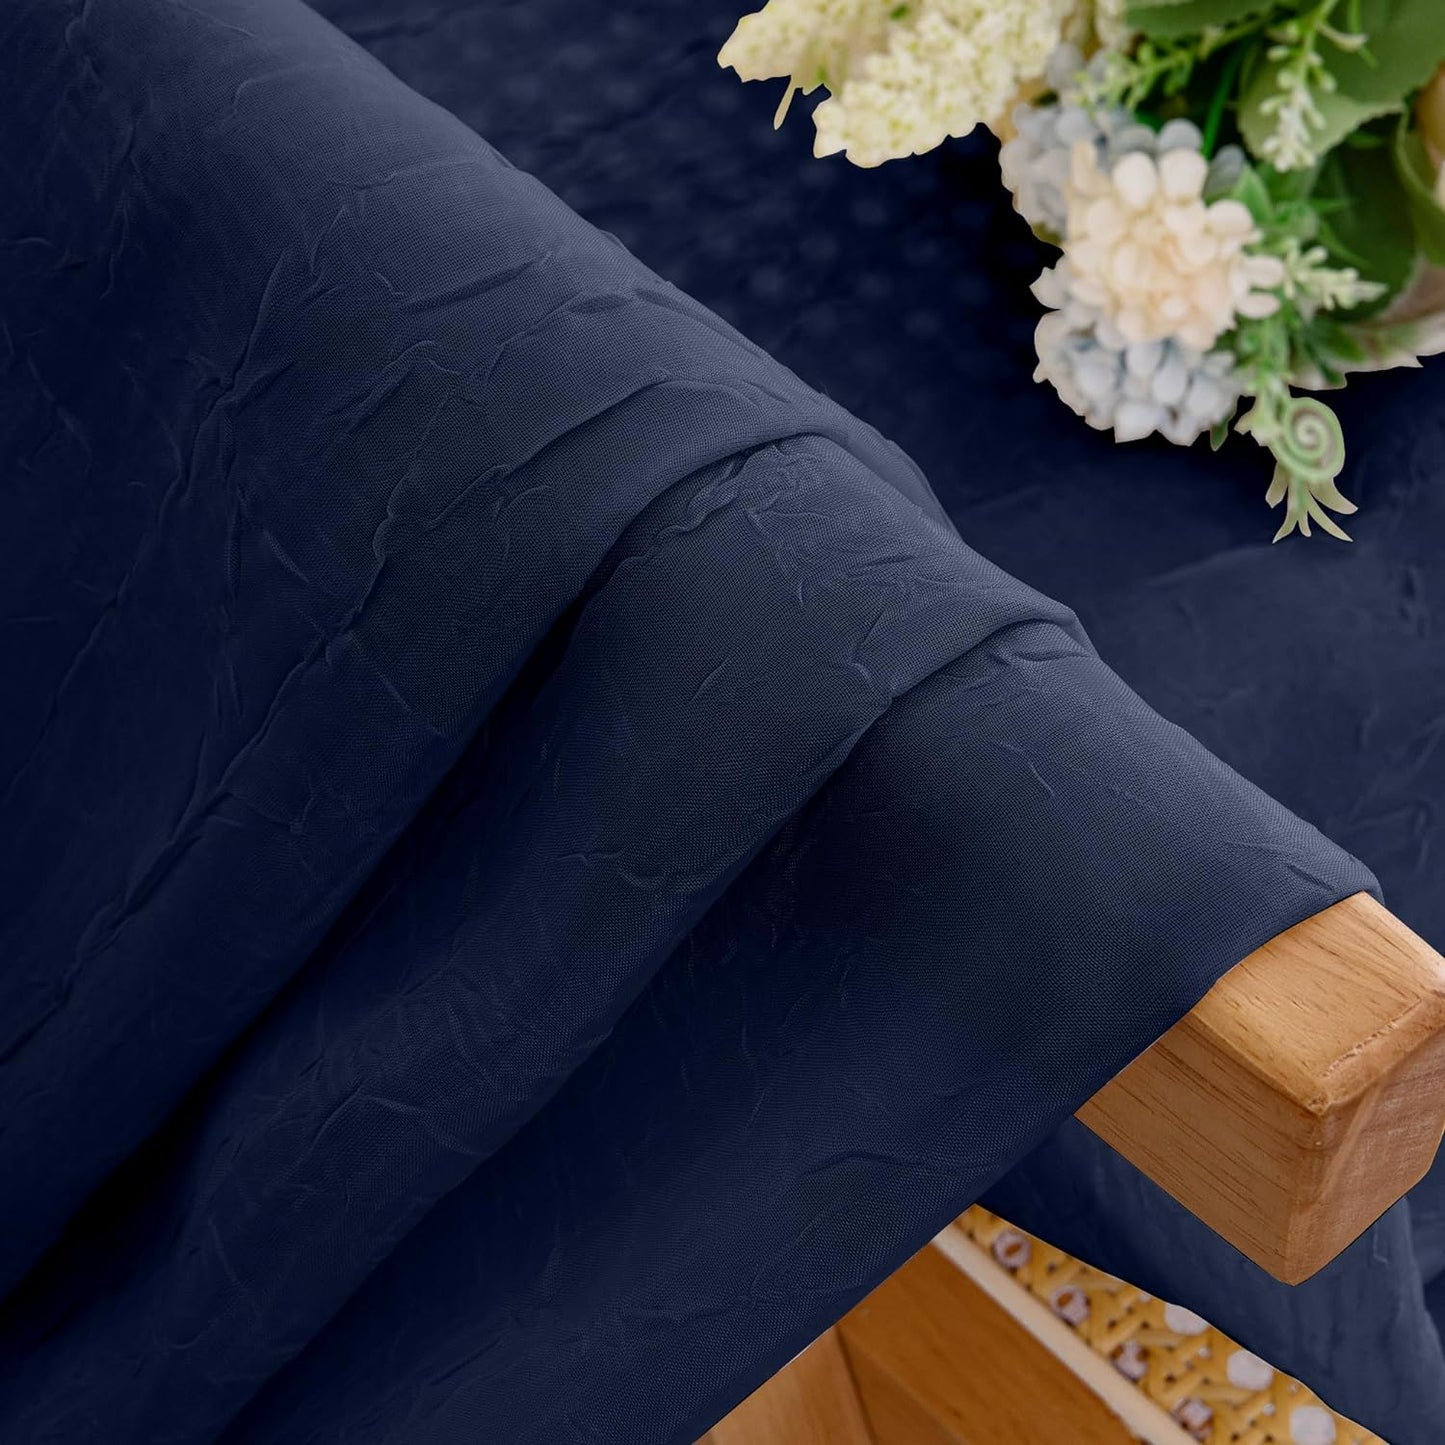 Crushed Sheer White Curtains 63 Inch Length 2 Panels, Light Filtering Solid Crinkle Voile Short Sheer Curtian for Bedroom Living Room, Each 42Wx63L Inches  Chyhomenyc Navy Blue 42 W X 96 L 